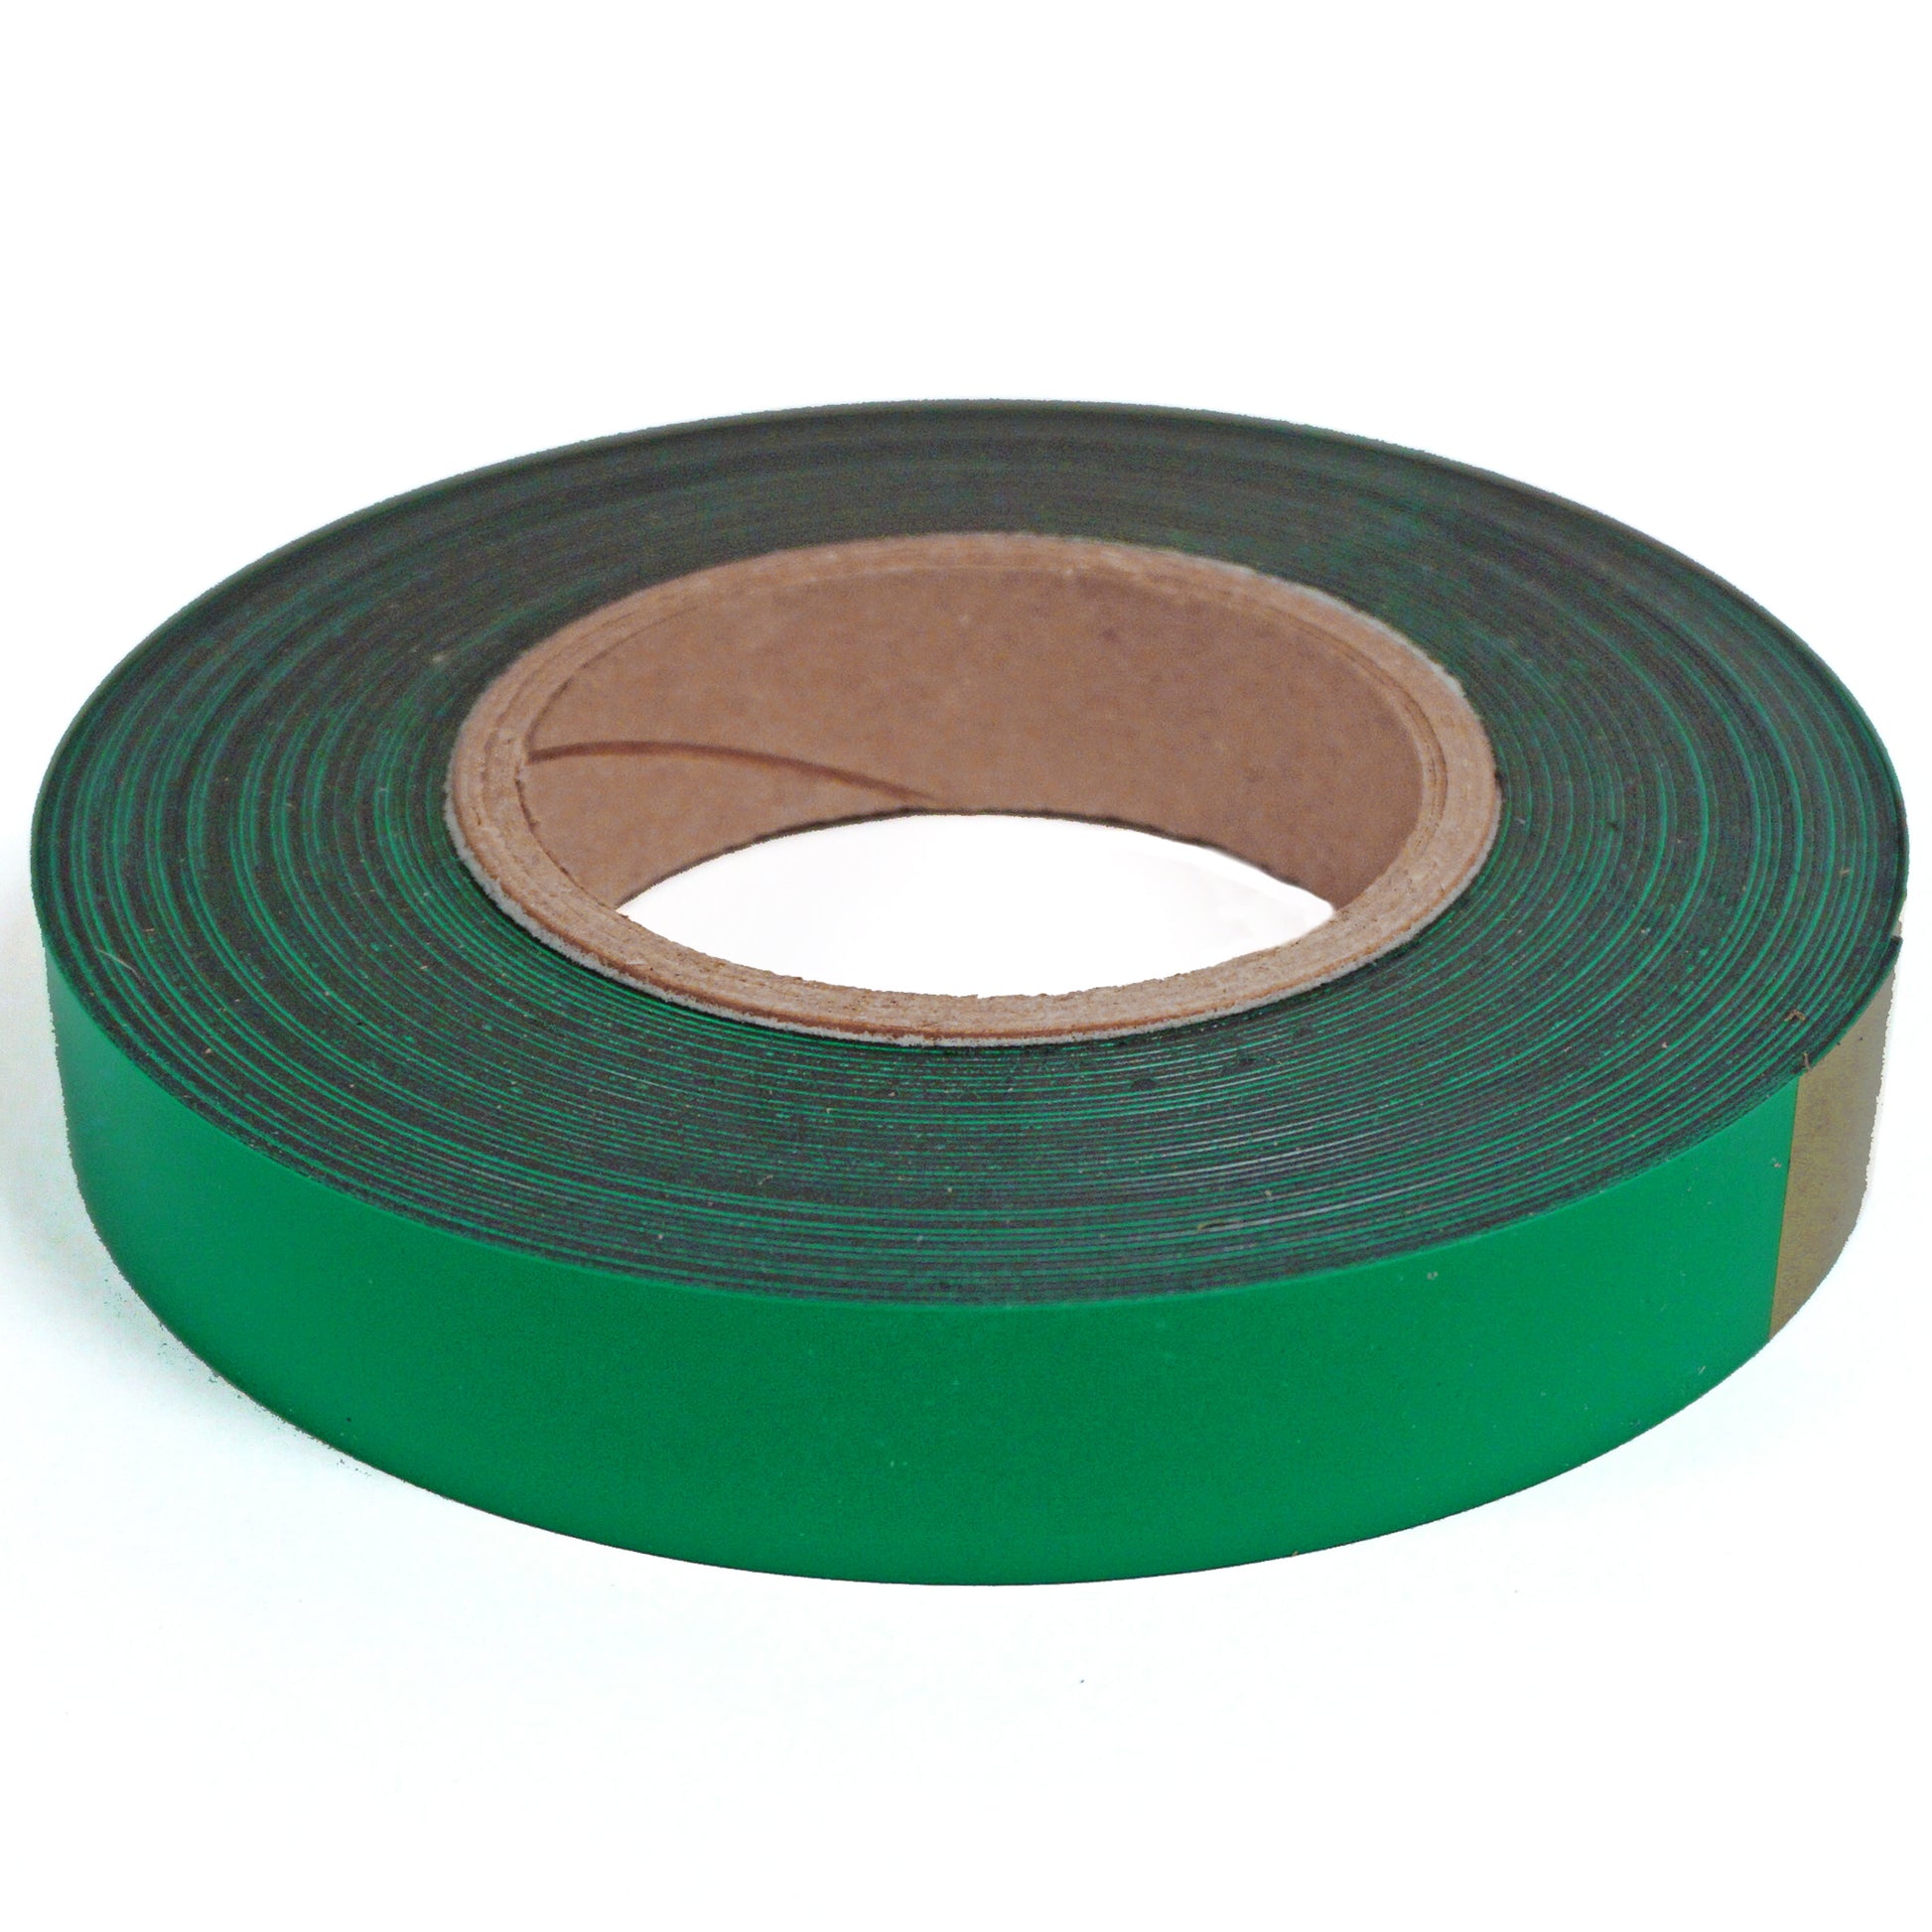 Load image into Gallery viewer, ZGN03040GR/WKS50 Magnetic Labeling Strip w/ Green Vinyl Surface - 45 Degree Angle View